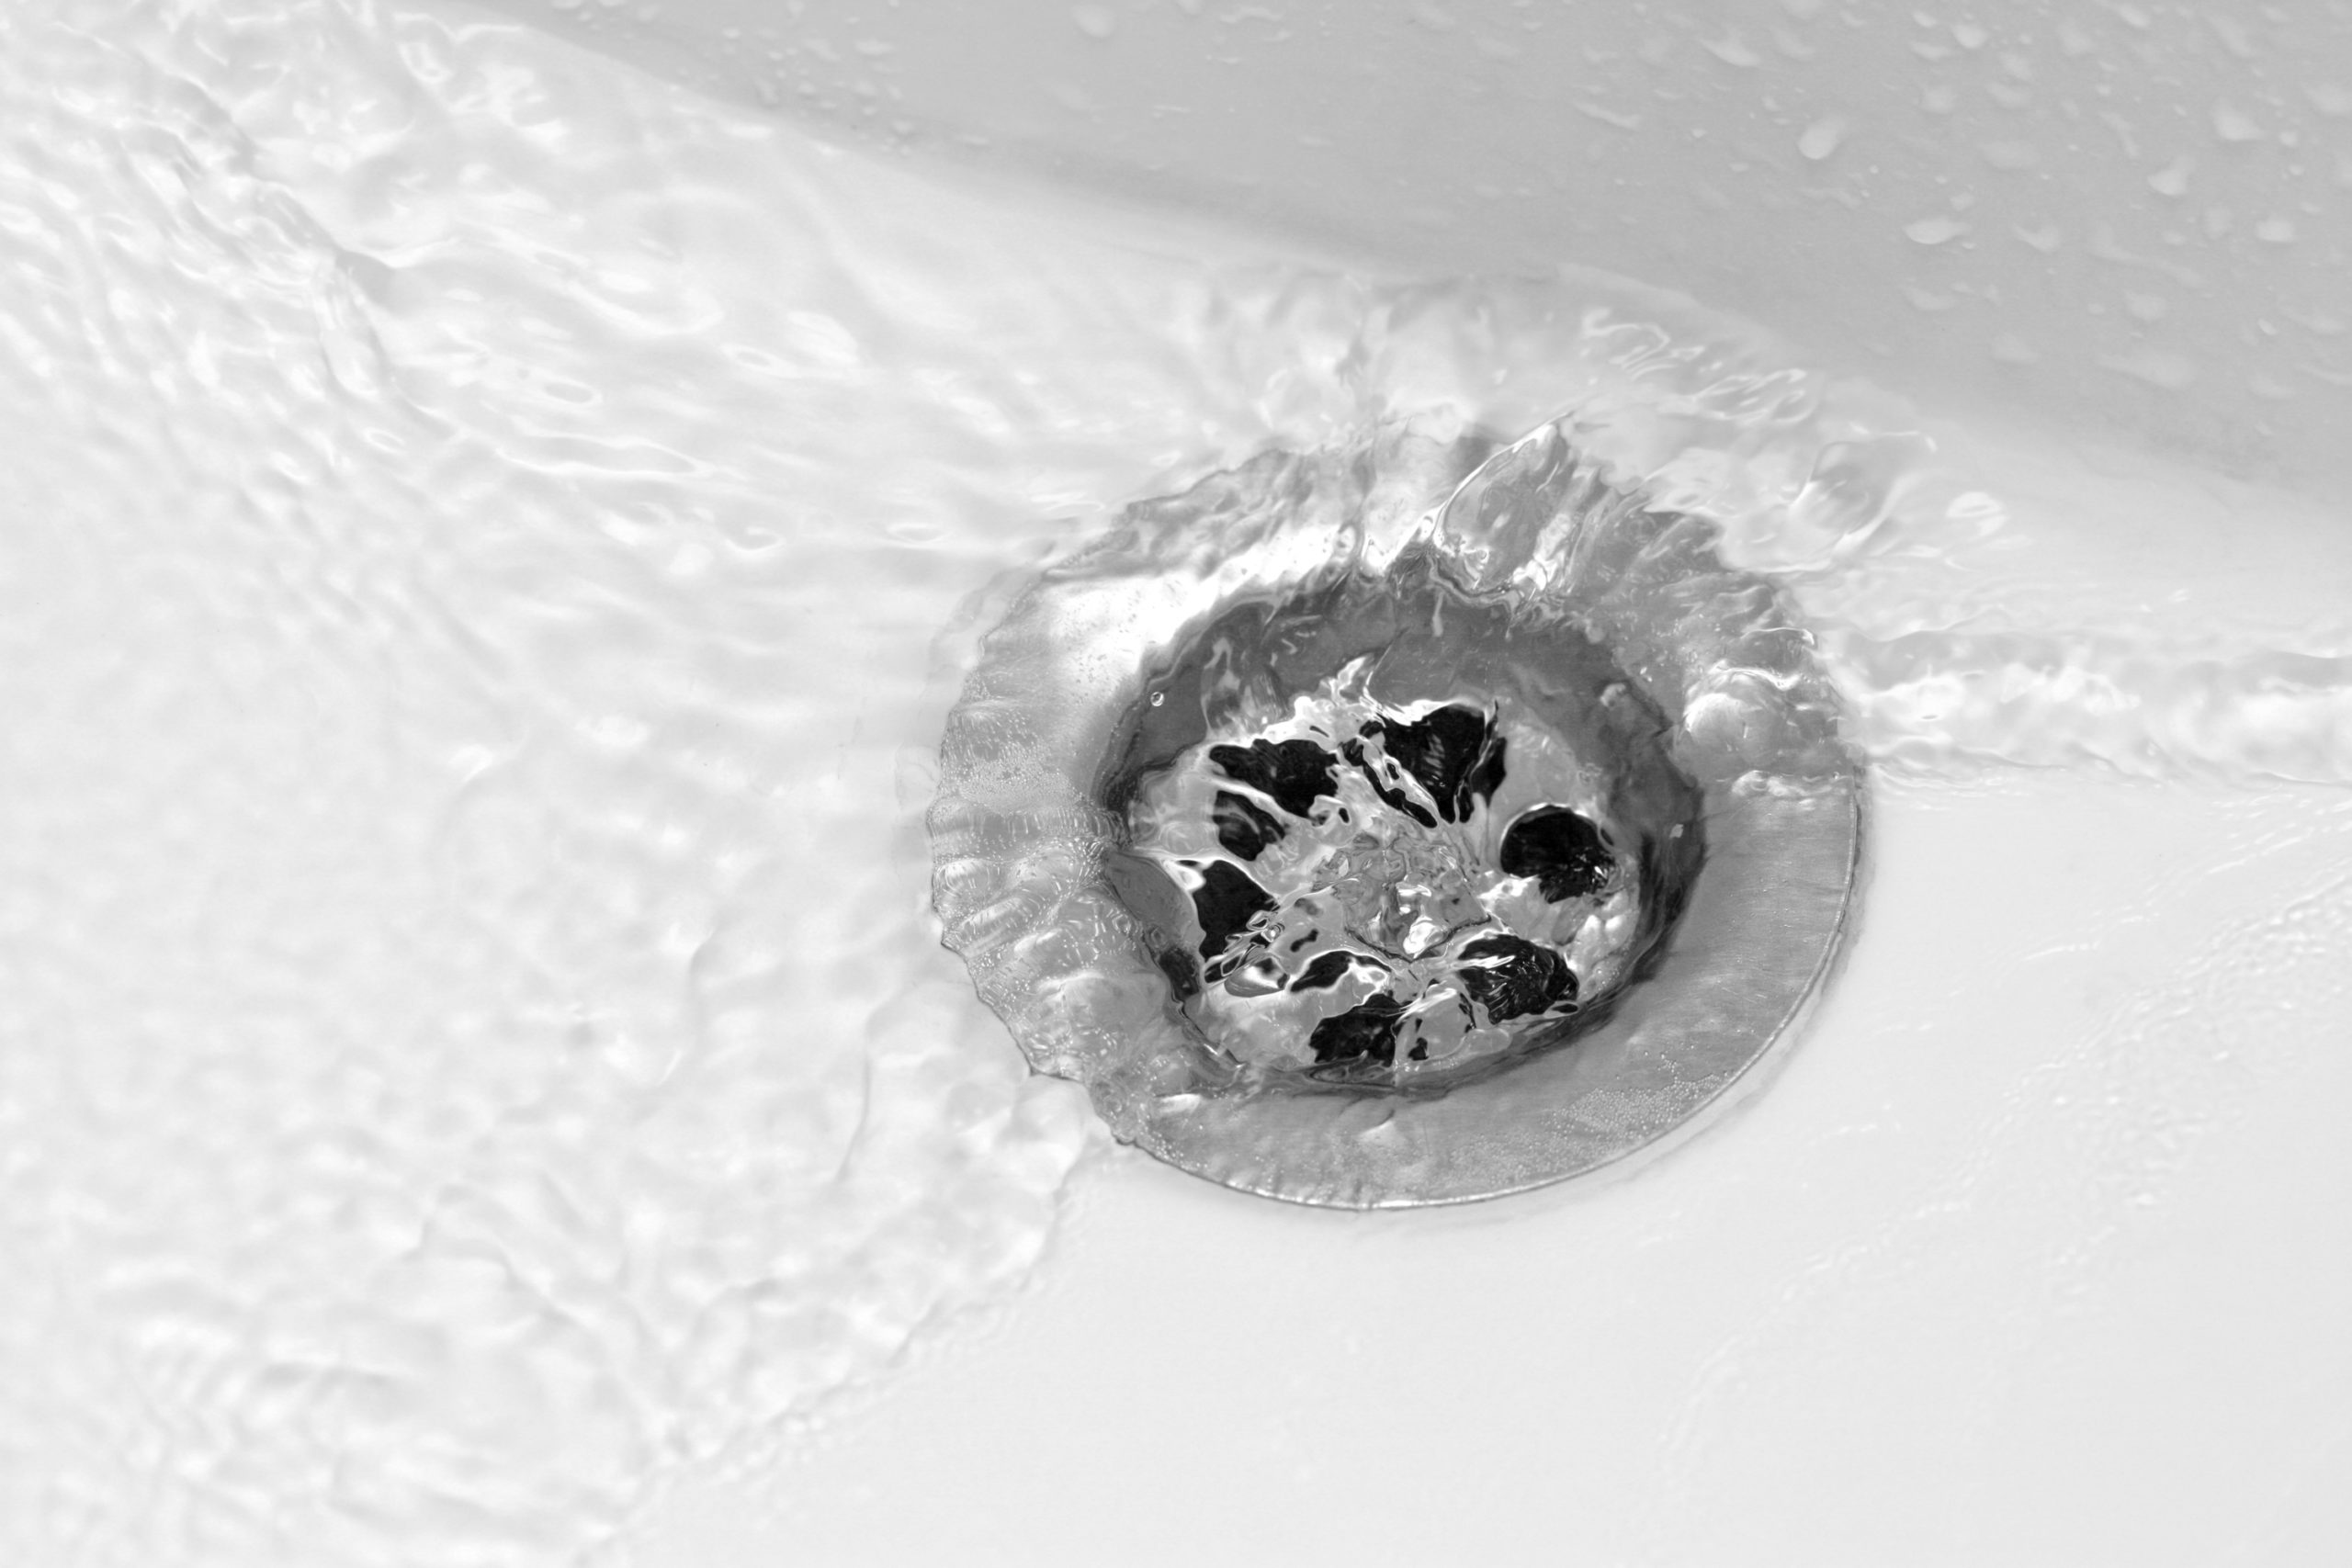 Is Your Drain Clogged? Here’s 3 Types of Drain Openers That Can Help